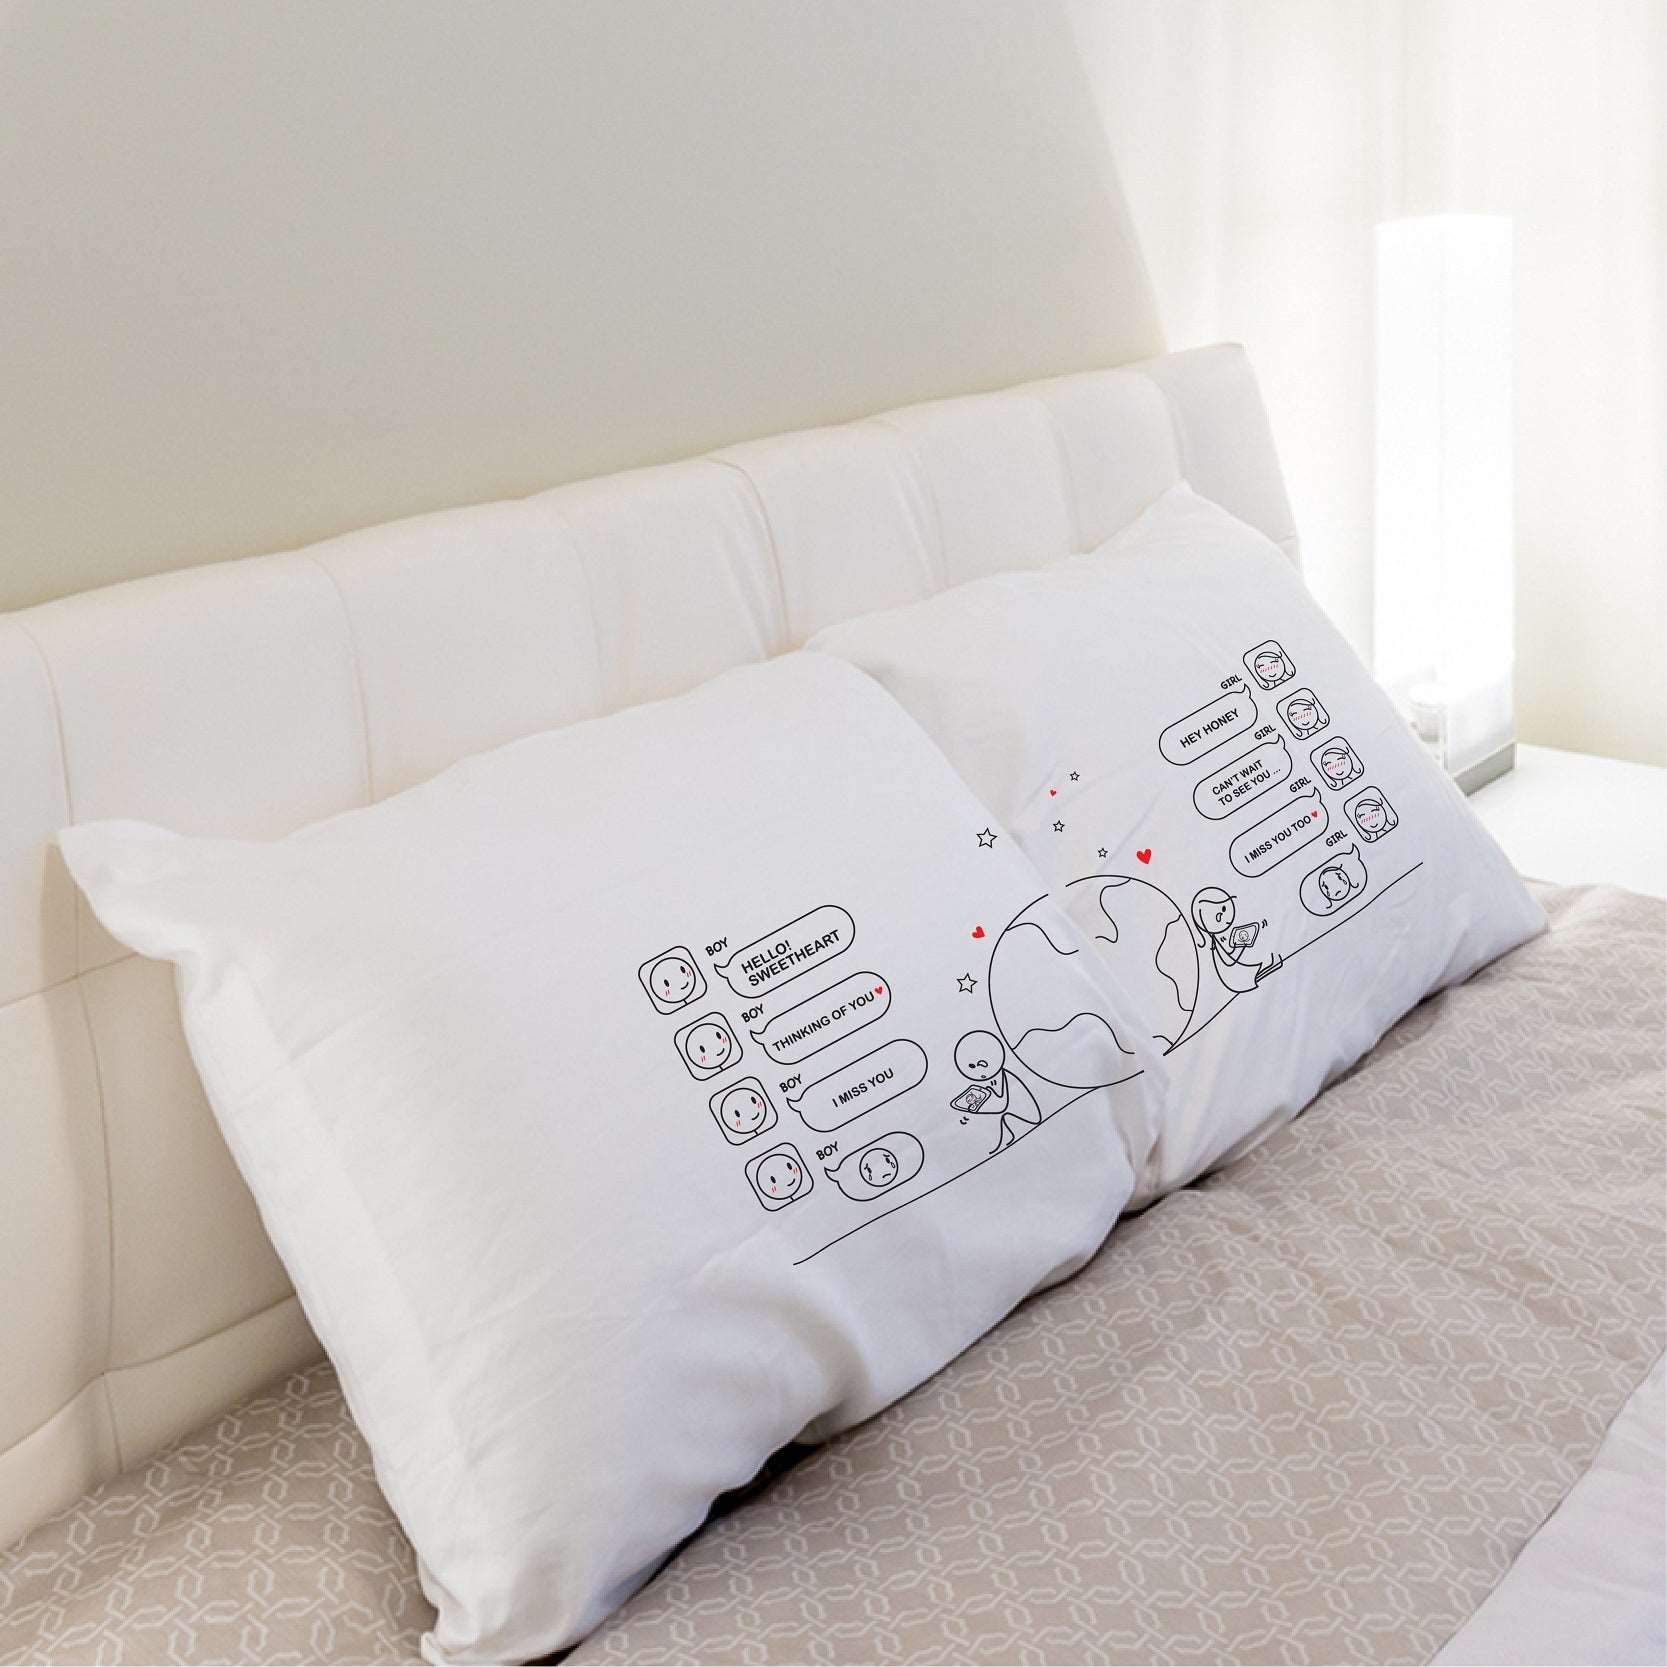 A charming addition to any couples bed, this elegant white pillow makes for a thoughtful anniversary gift for him or her.